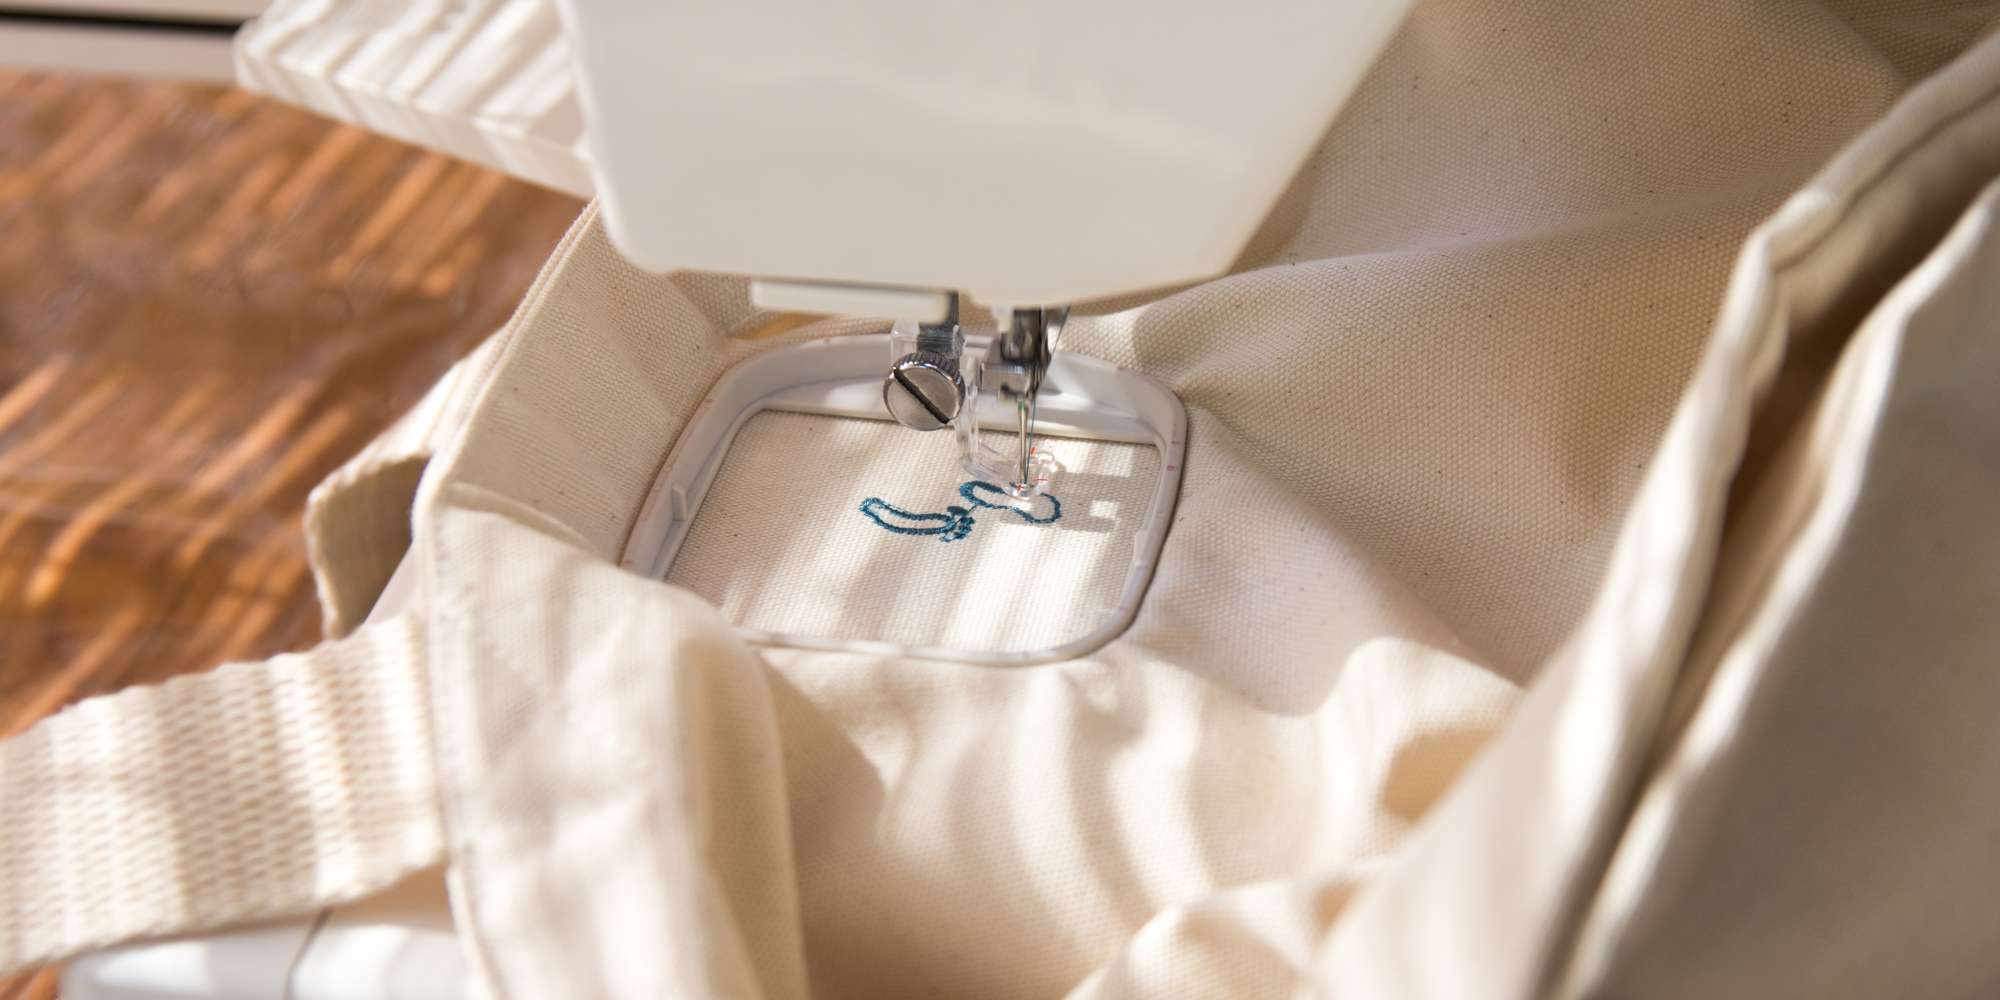 Embroidering a Backpack with Affordable Digitizing